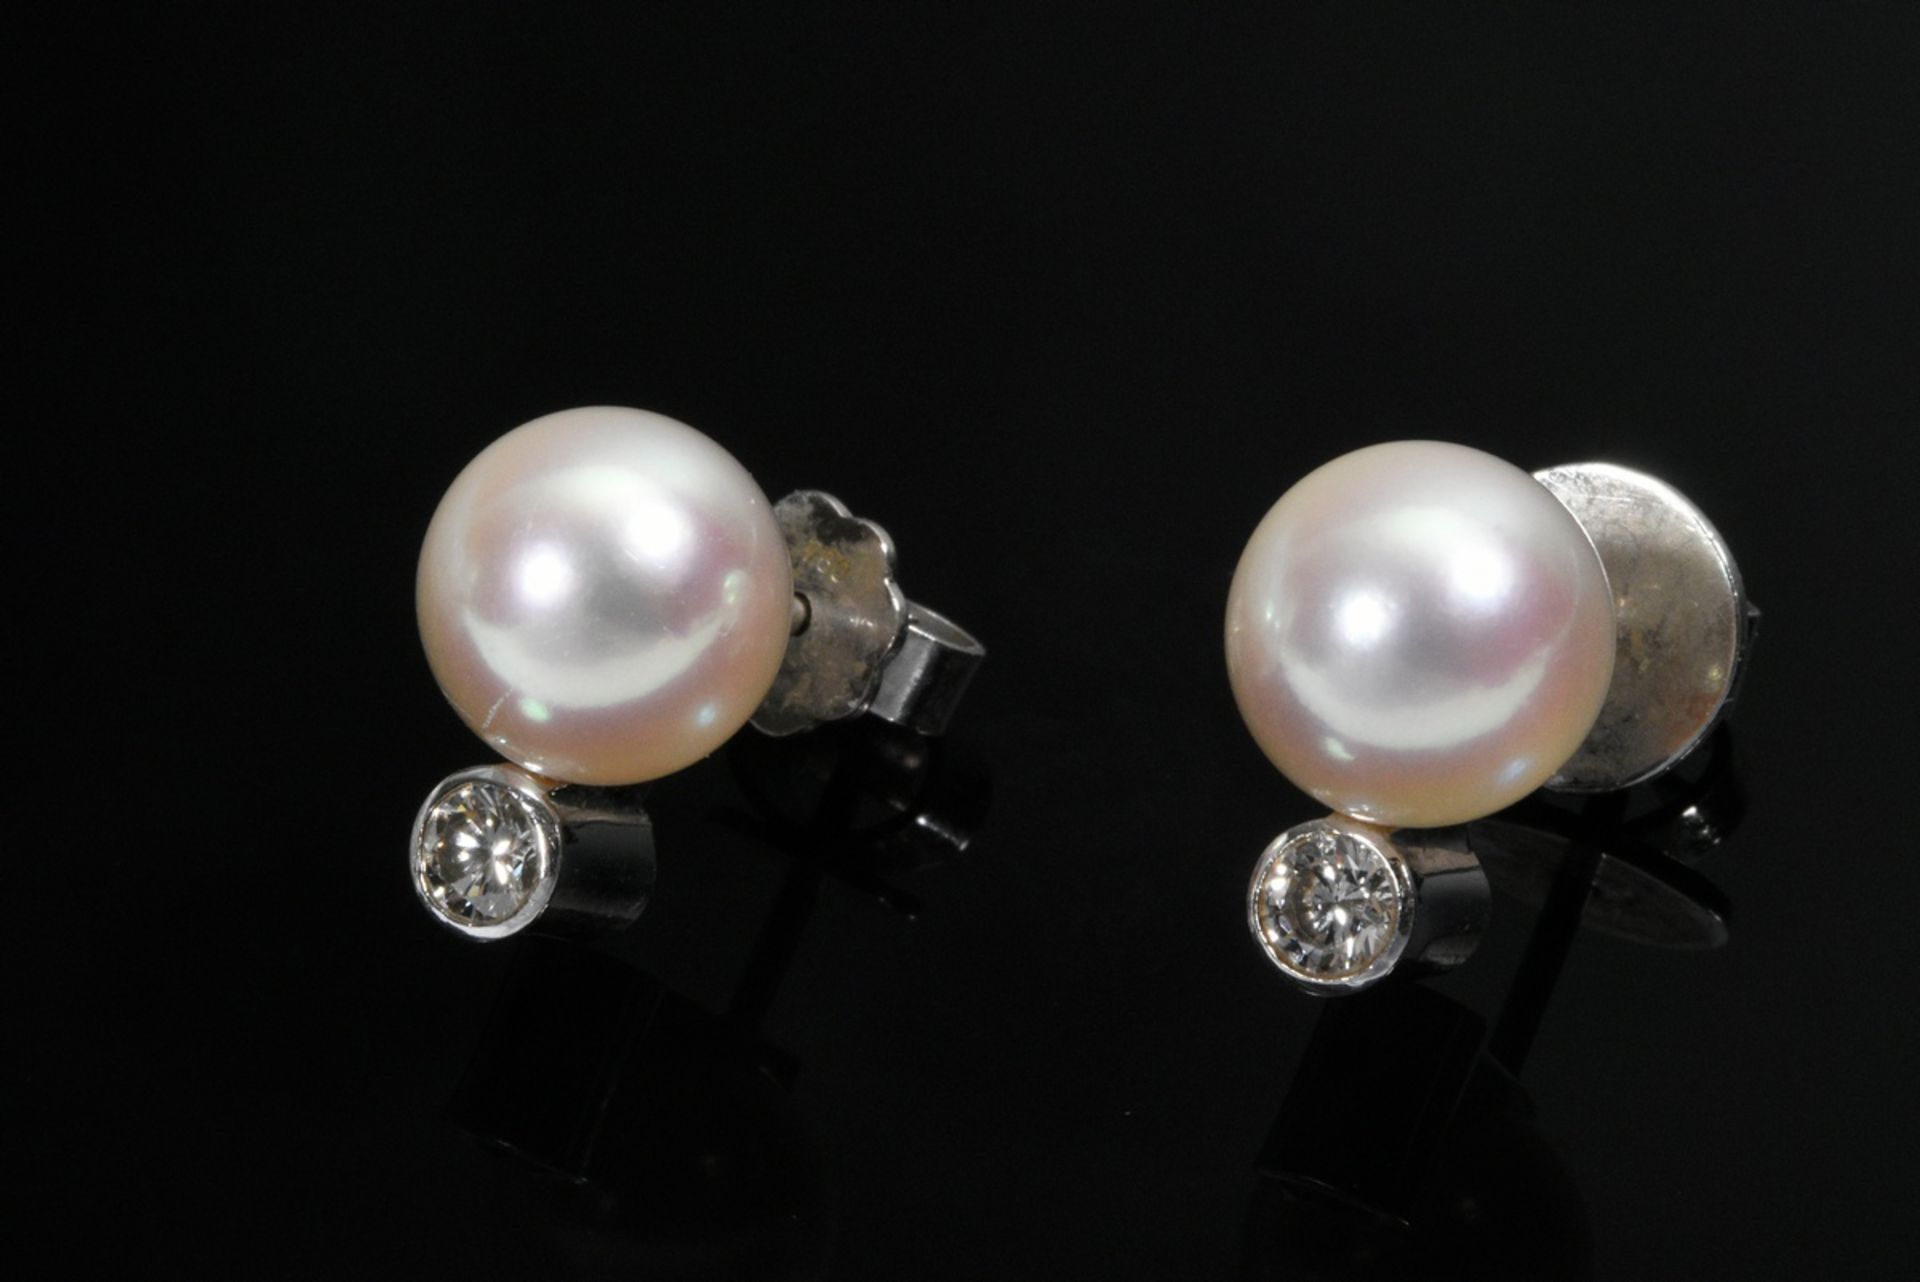 Pair of 750 white gold stud earrings with cultured pearls (Ø 8.5mm) and brilliant-cut diamonds (app